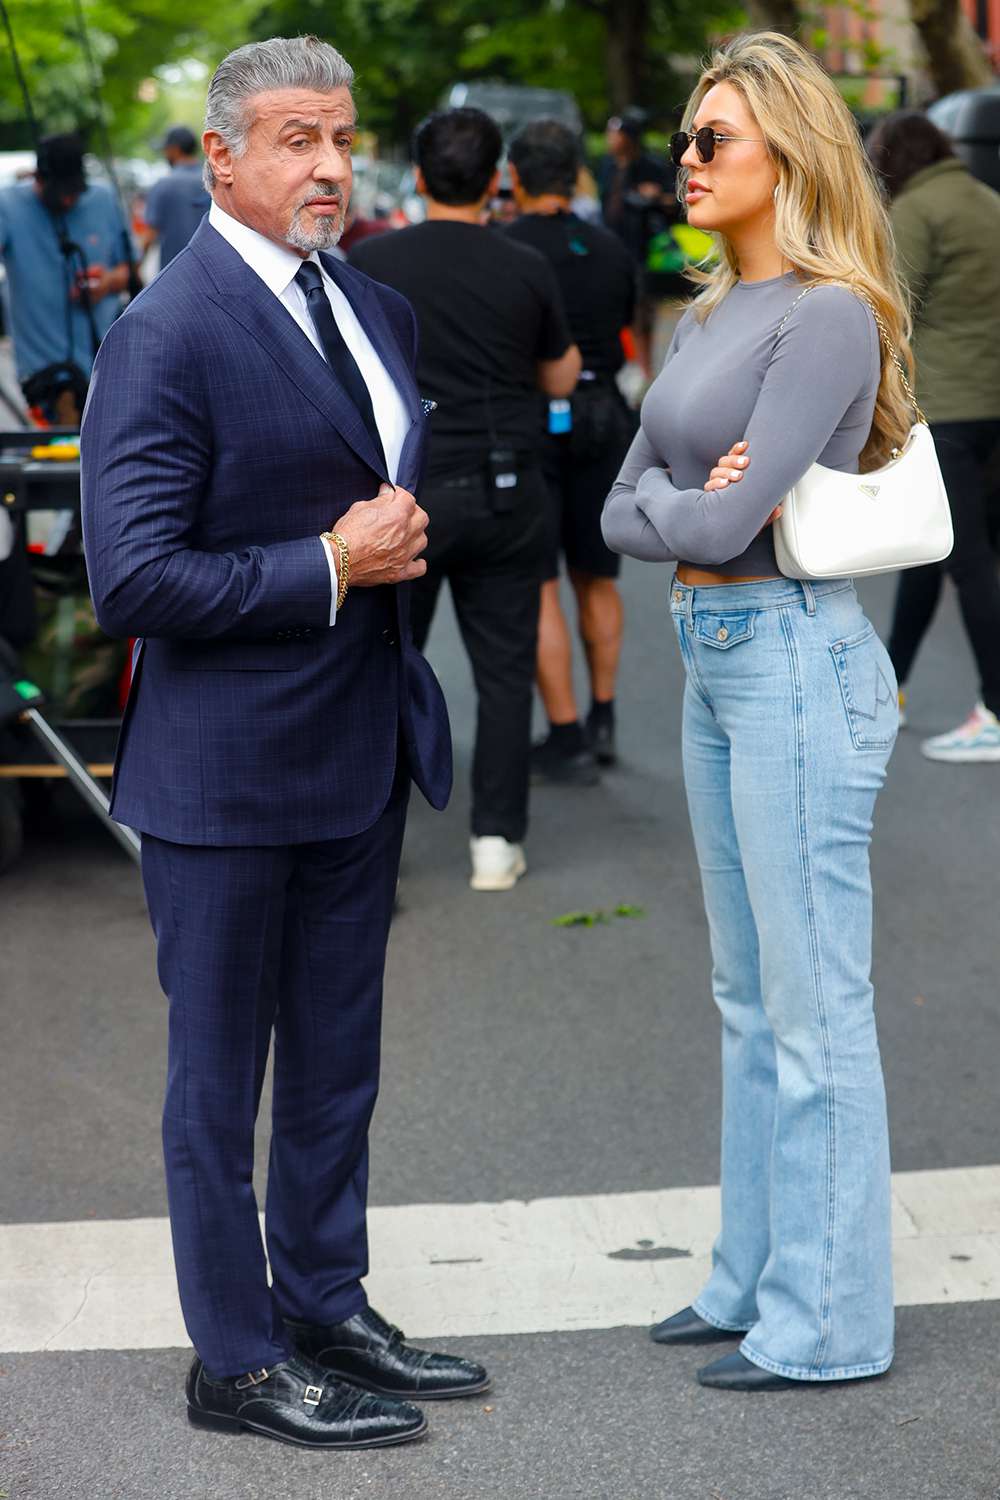 Sylvester Stallone and his daughter Sophia Rose Stallone are seen on the film set of the 'Tulsa King' TV Series in New York City.